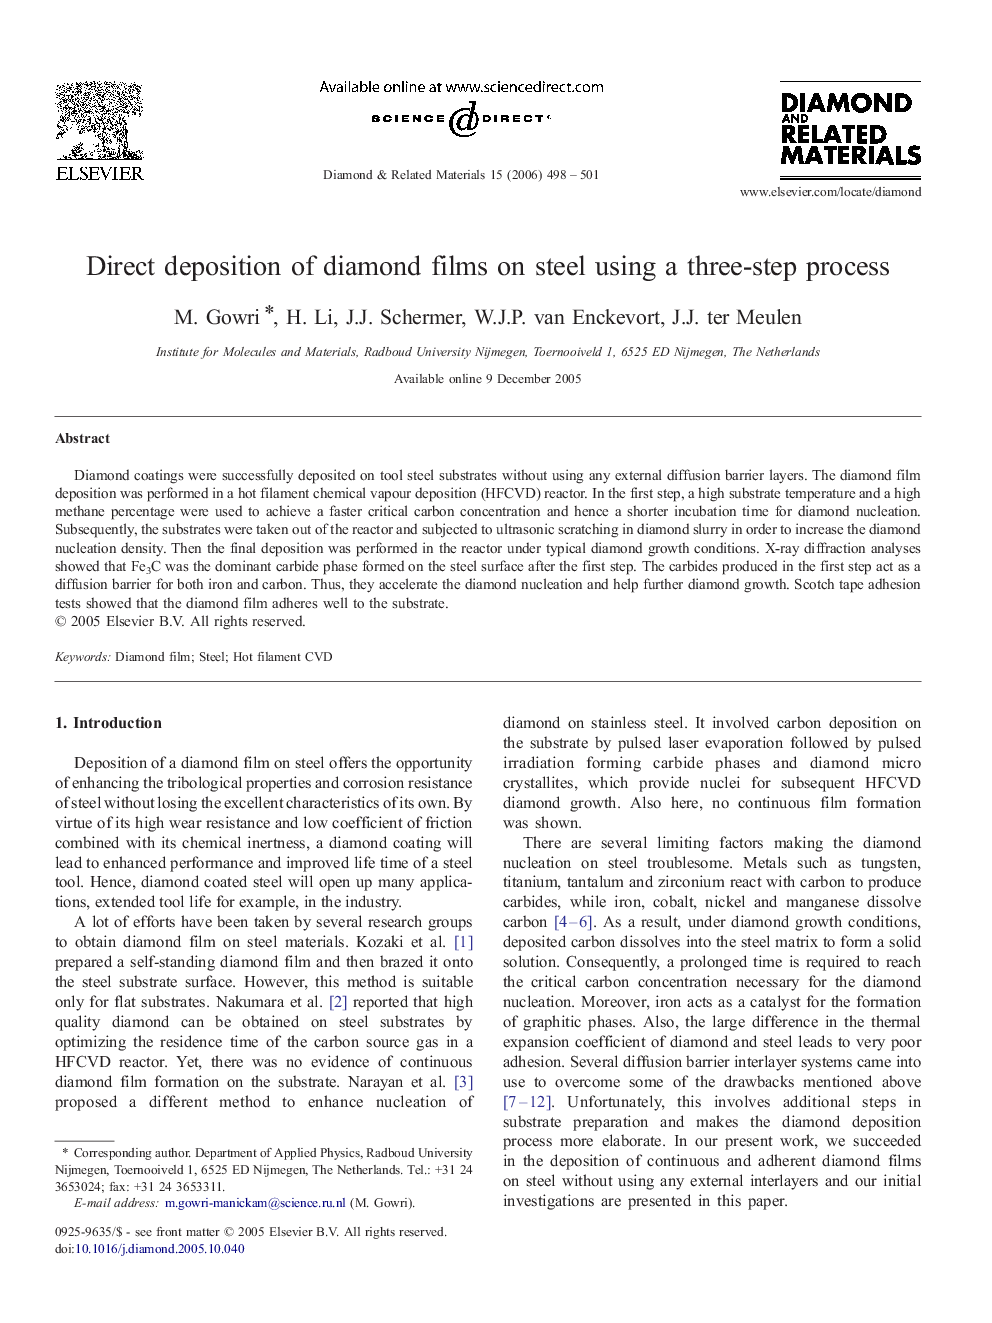 Direct deposition of diamond films on steel using a three-step process